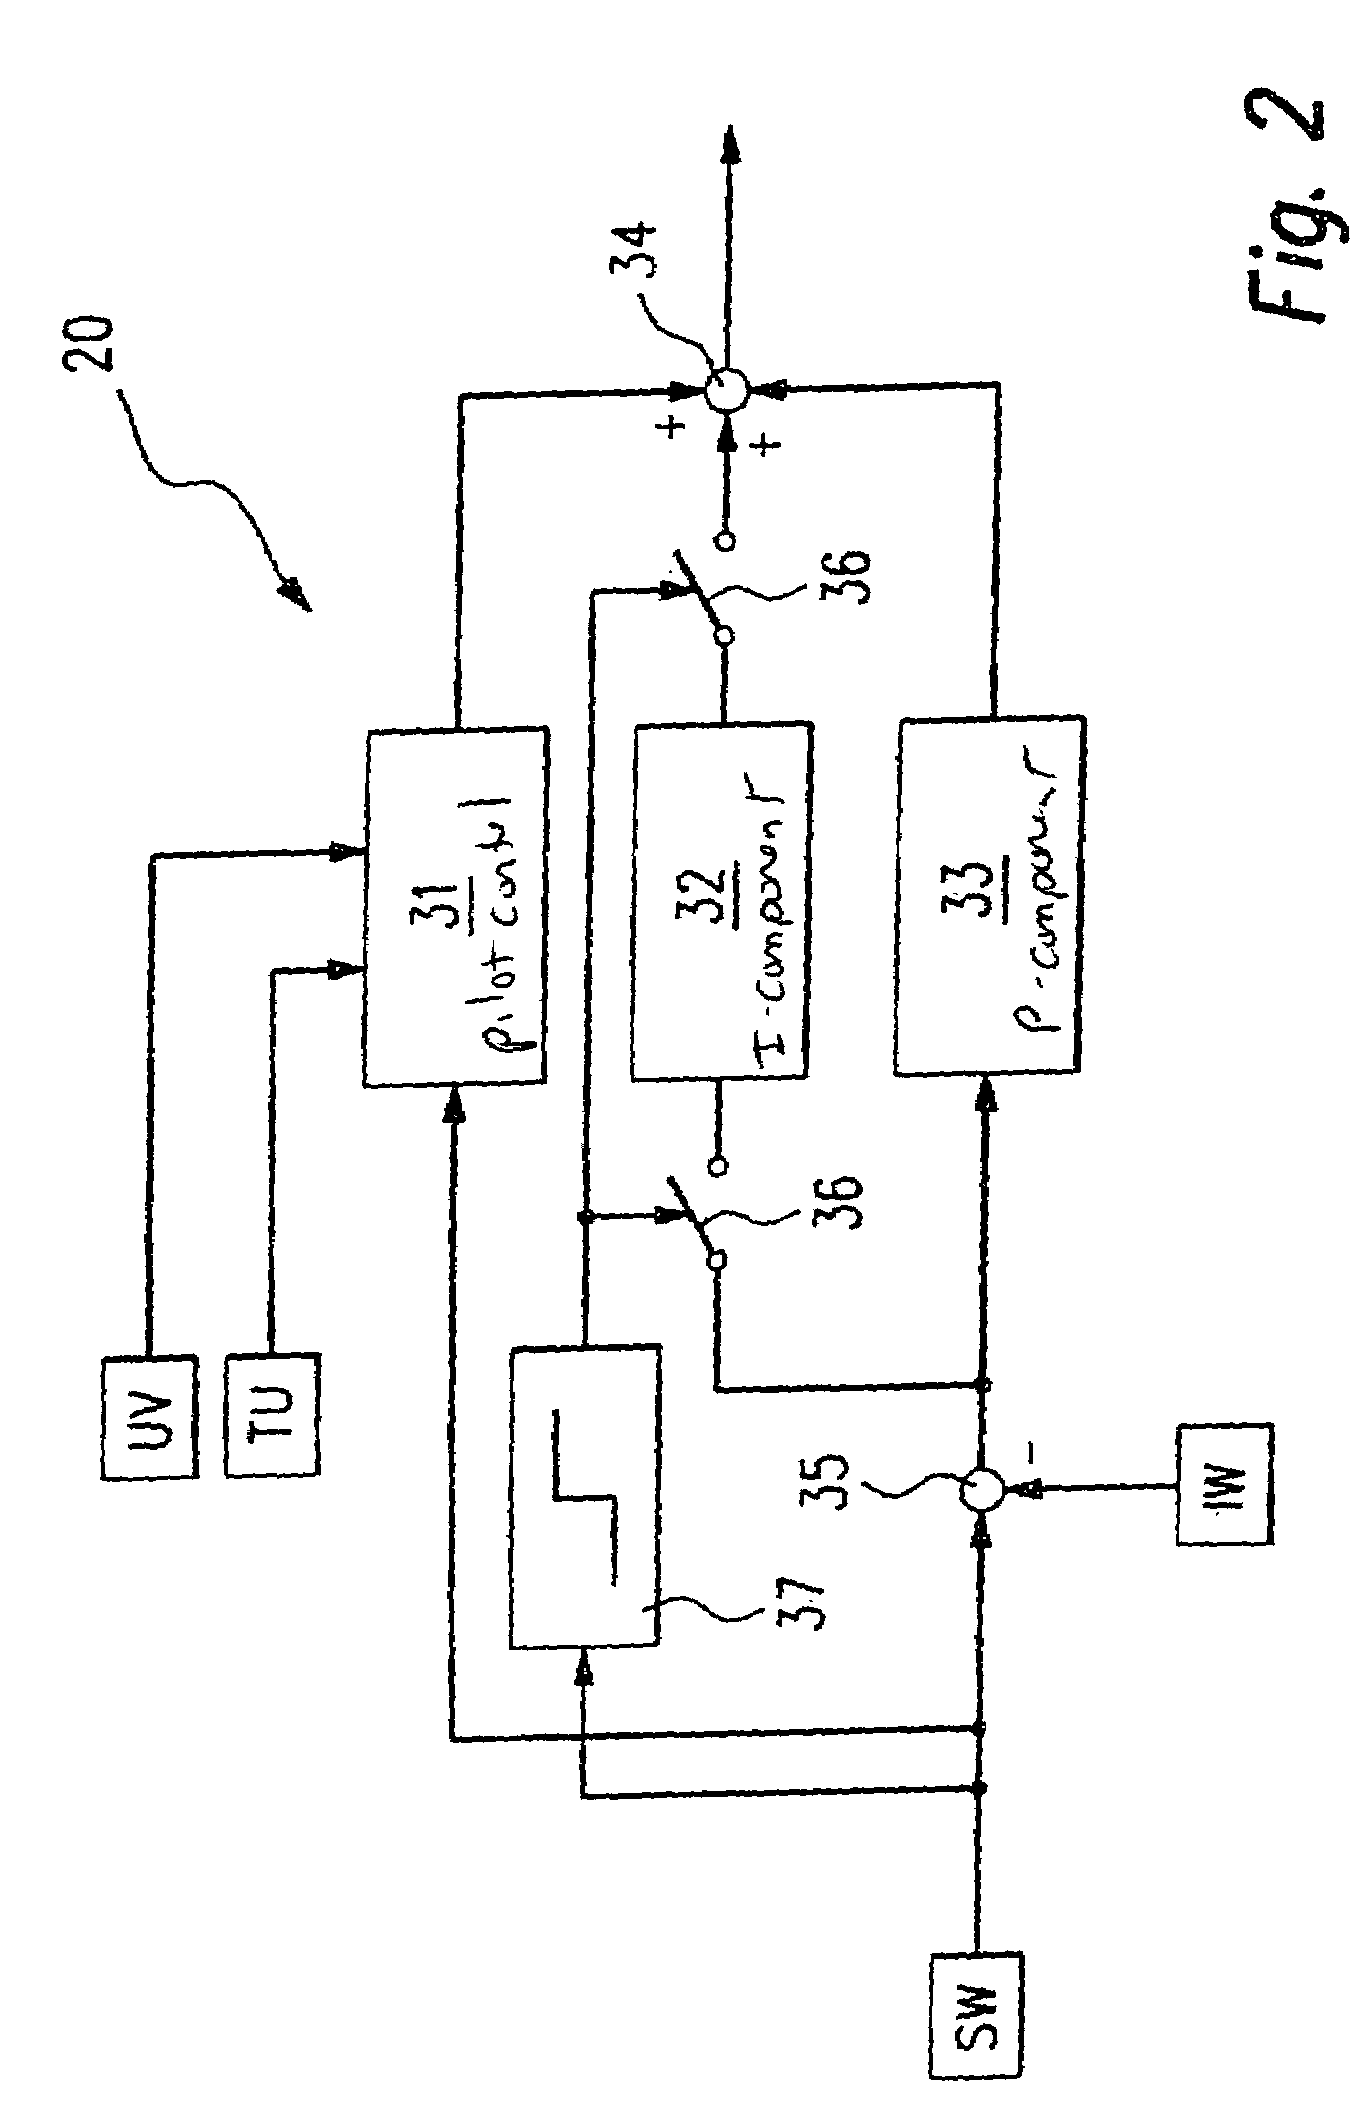 Method for regulating the current through an electromagnetic actuator